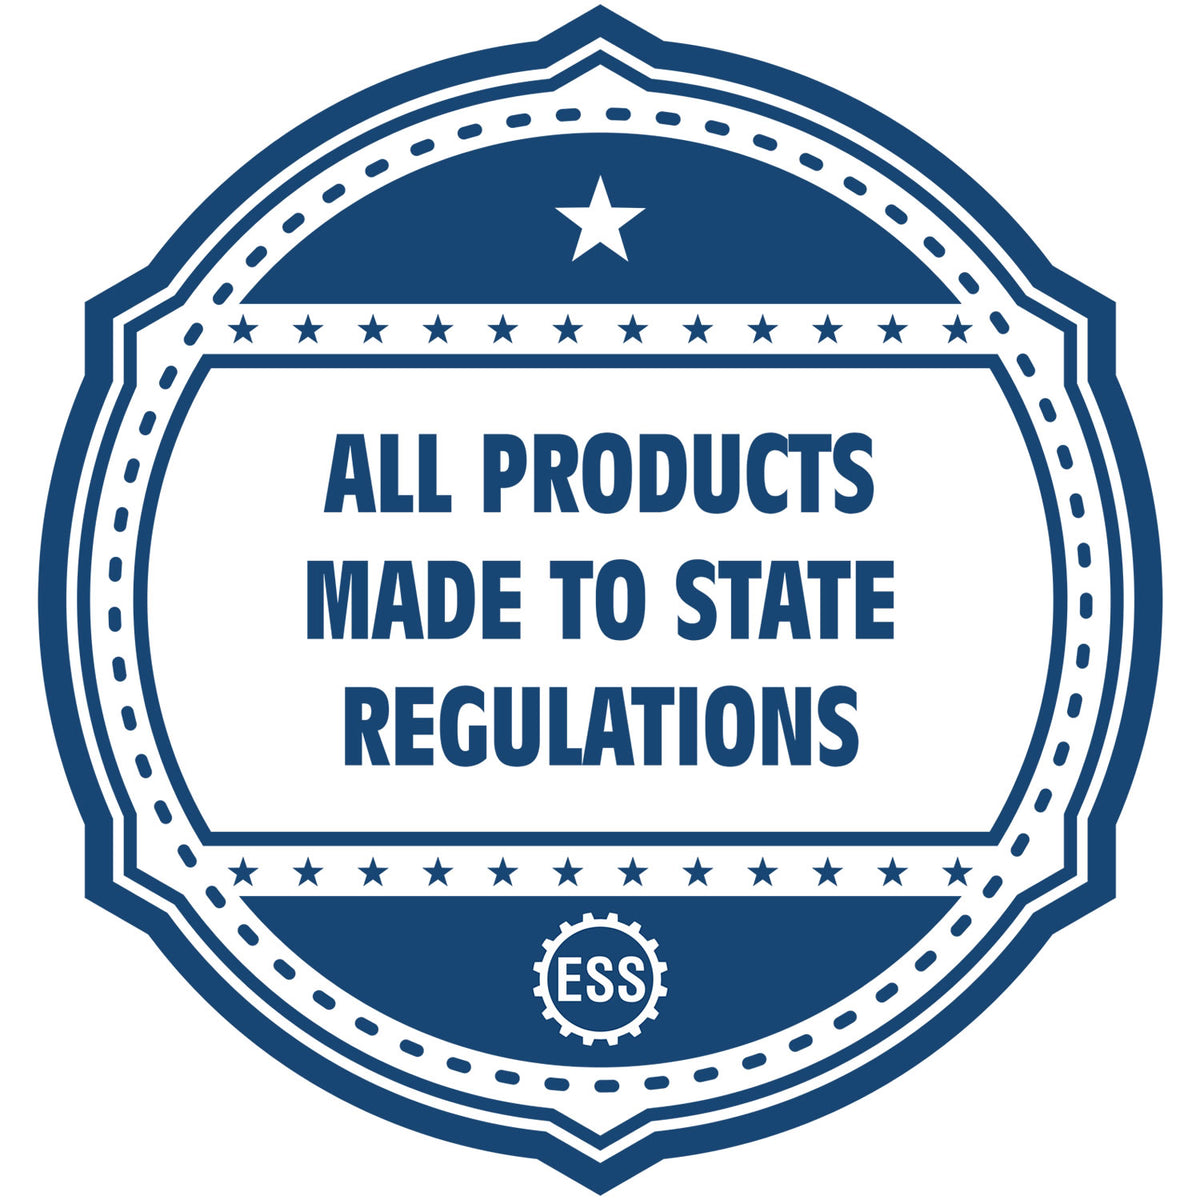 An icon or badge element for the Digital Maine Landscape Architect Stamp showing that this product is made in compliance with state regulations.